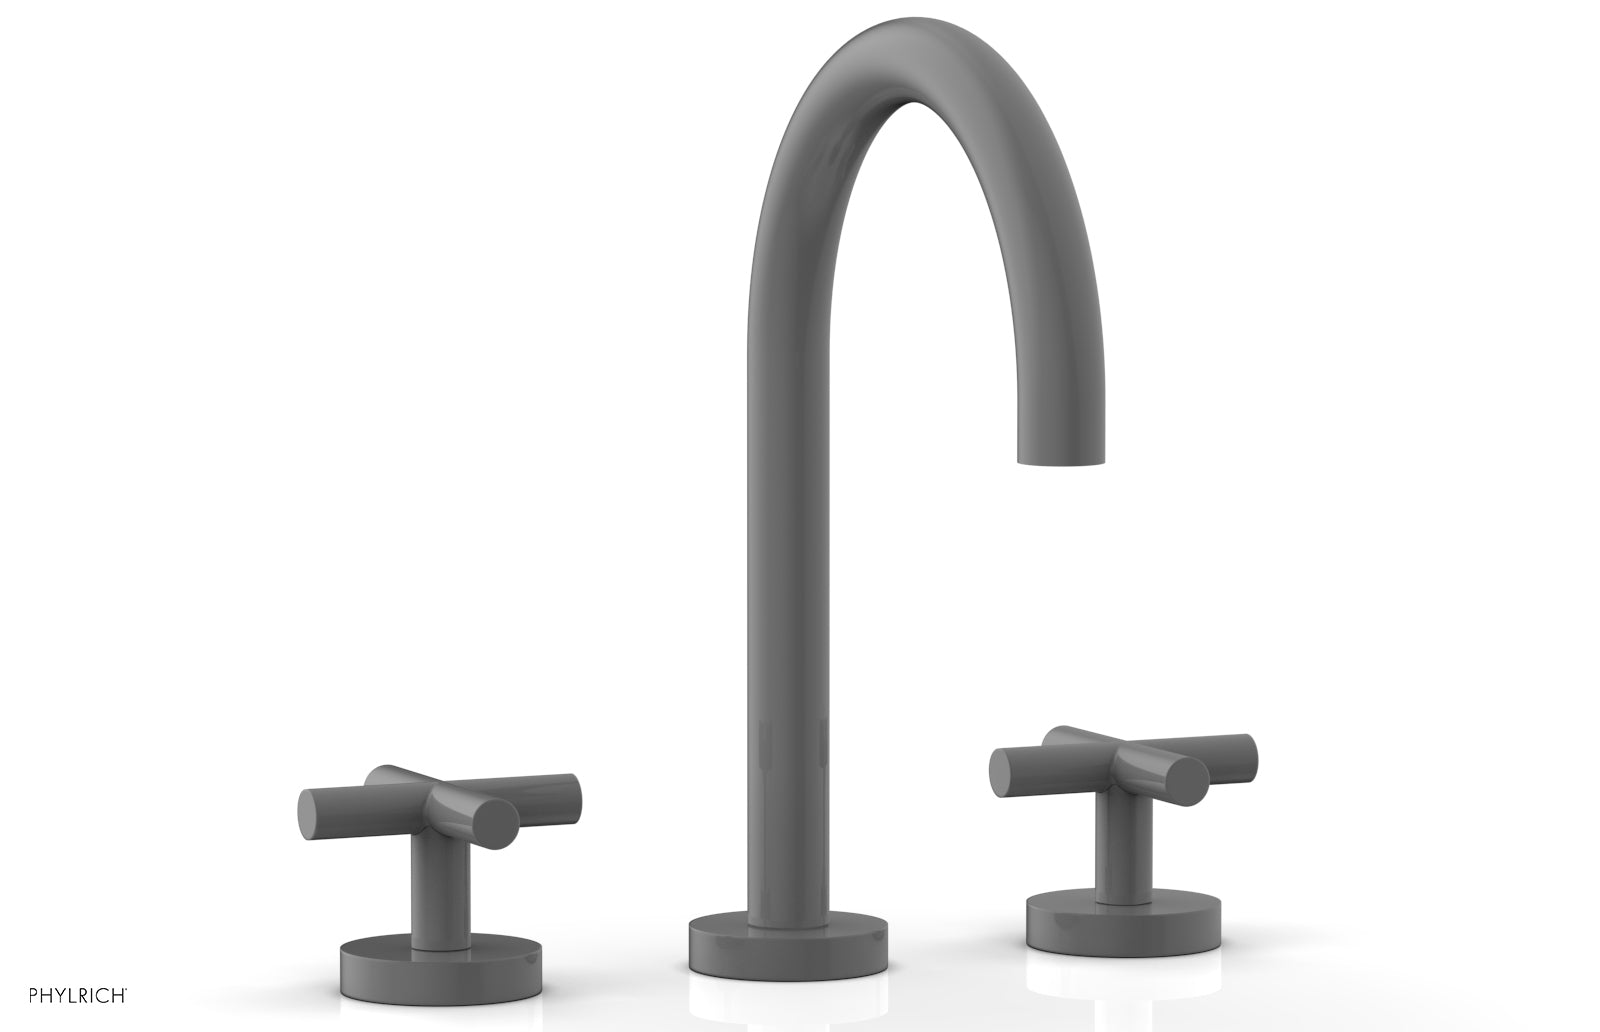 Phylrich TRANSITION Widespread Faucet - High Spout, Cross Handles